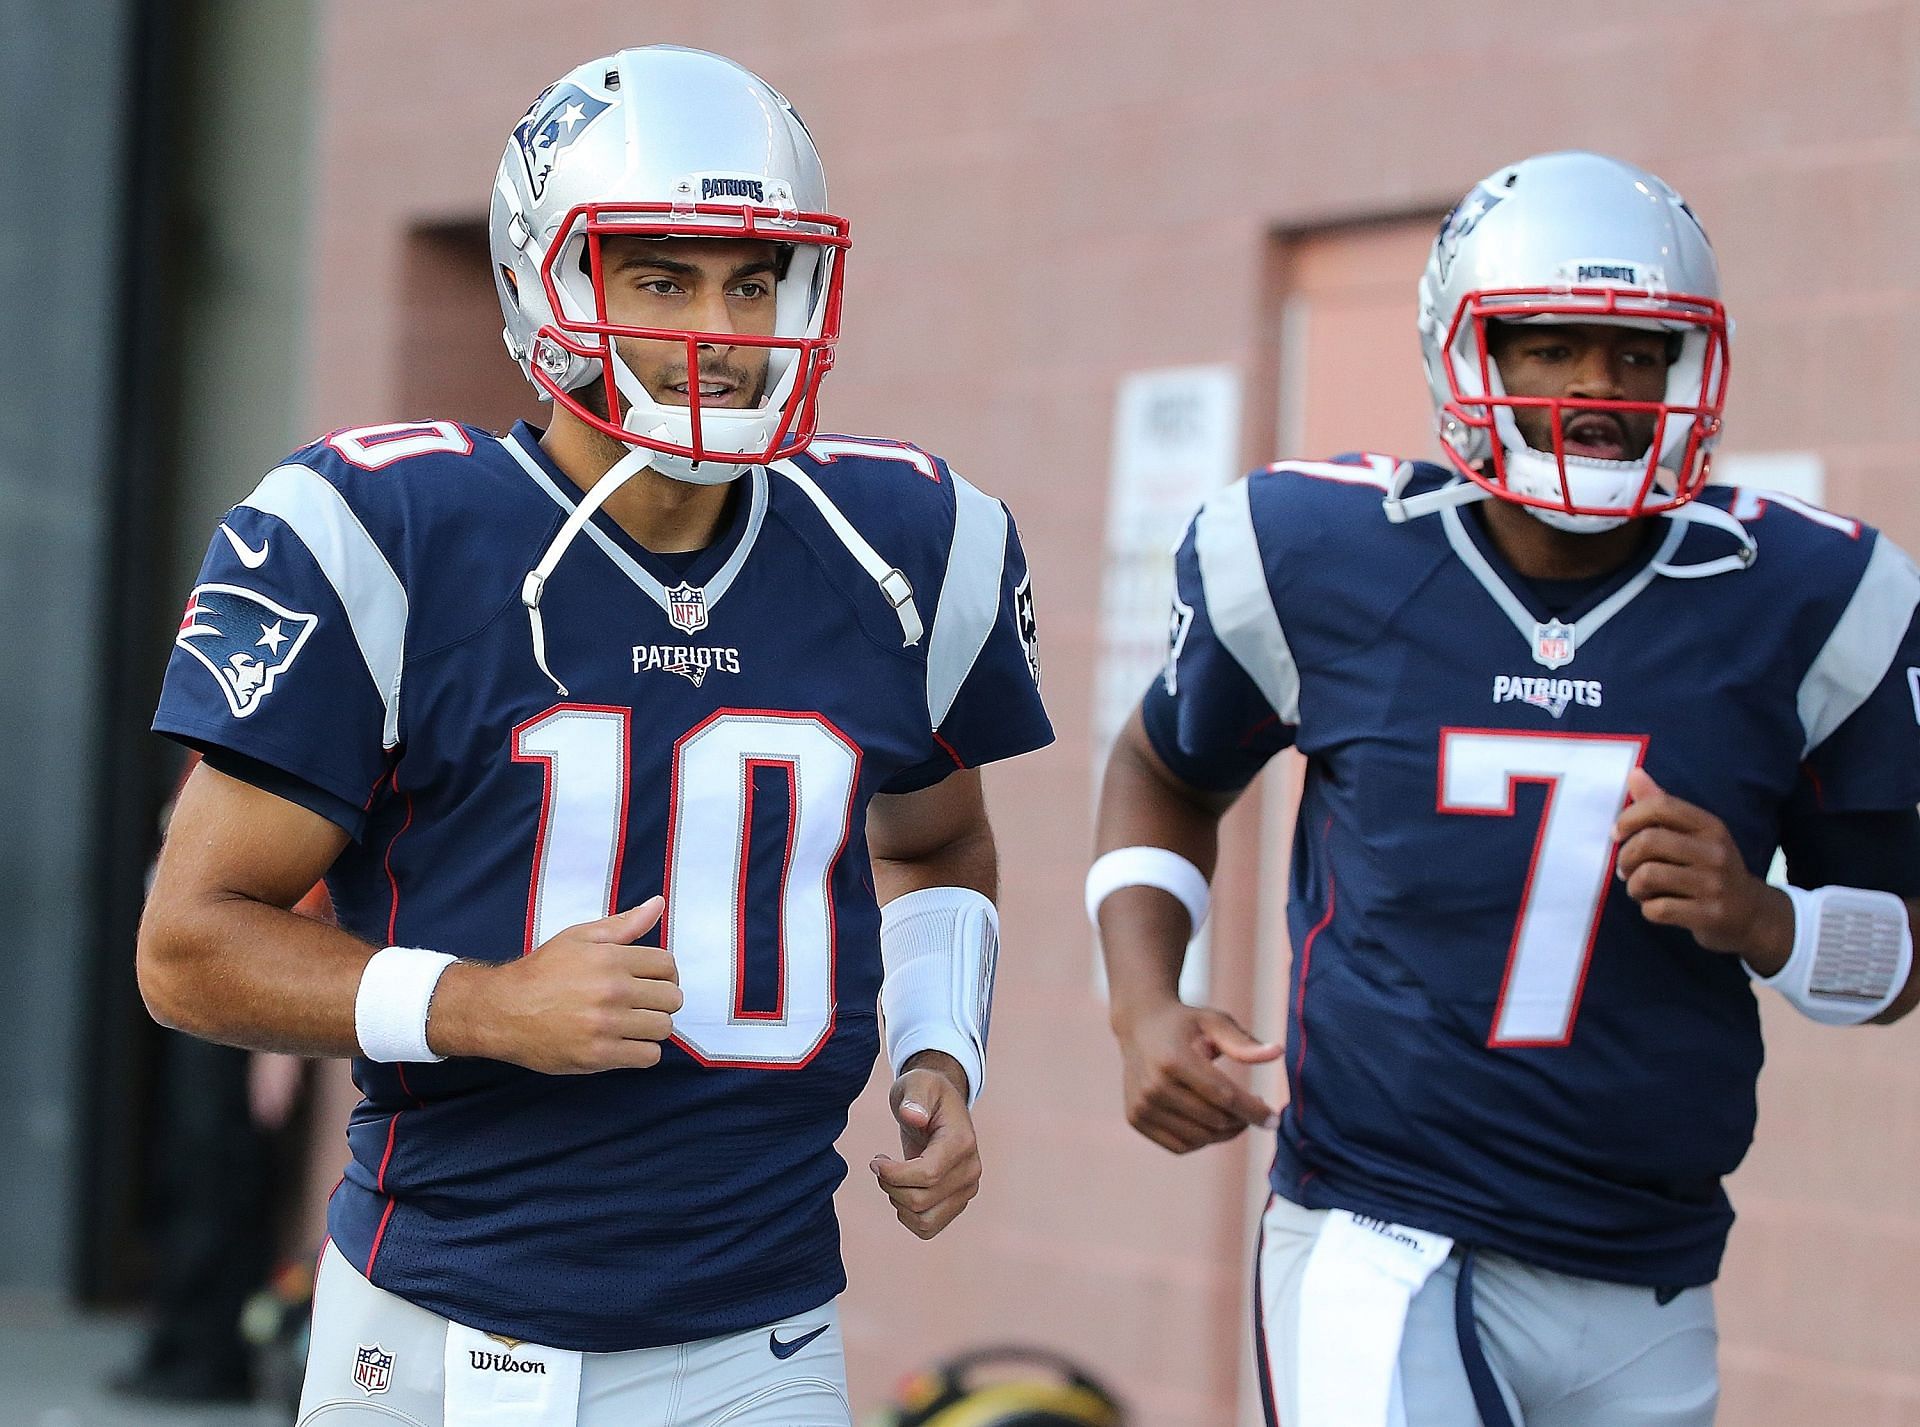 Jimmy Garoppolo and Jacoby Brissett